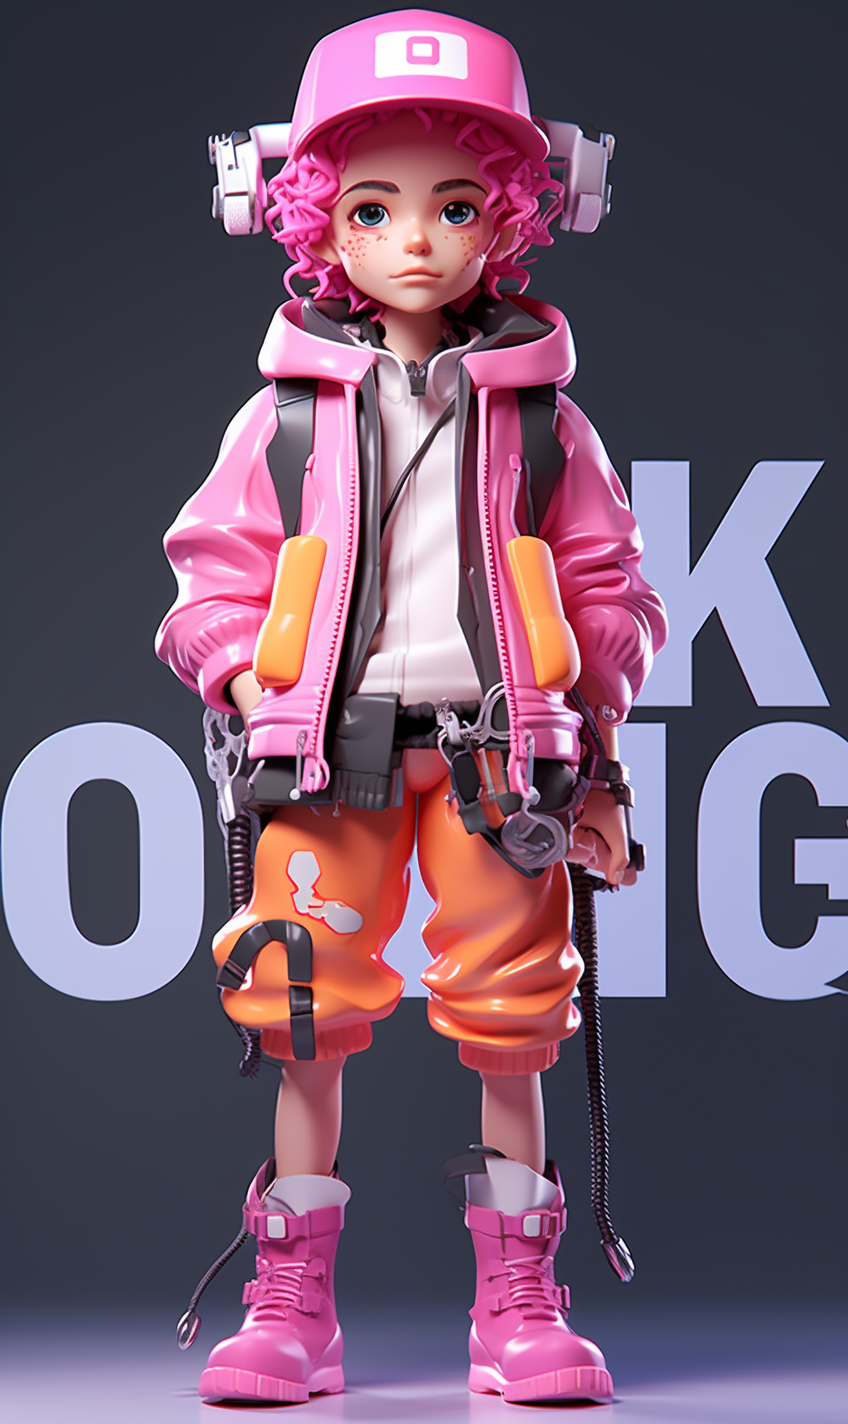 promptsbymarcus_a_character_wearing_pink_clothing_and_a_pink_ha_8e7a70c0-b914-4ab0-bad5-f19ed223623b.png